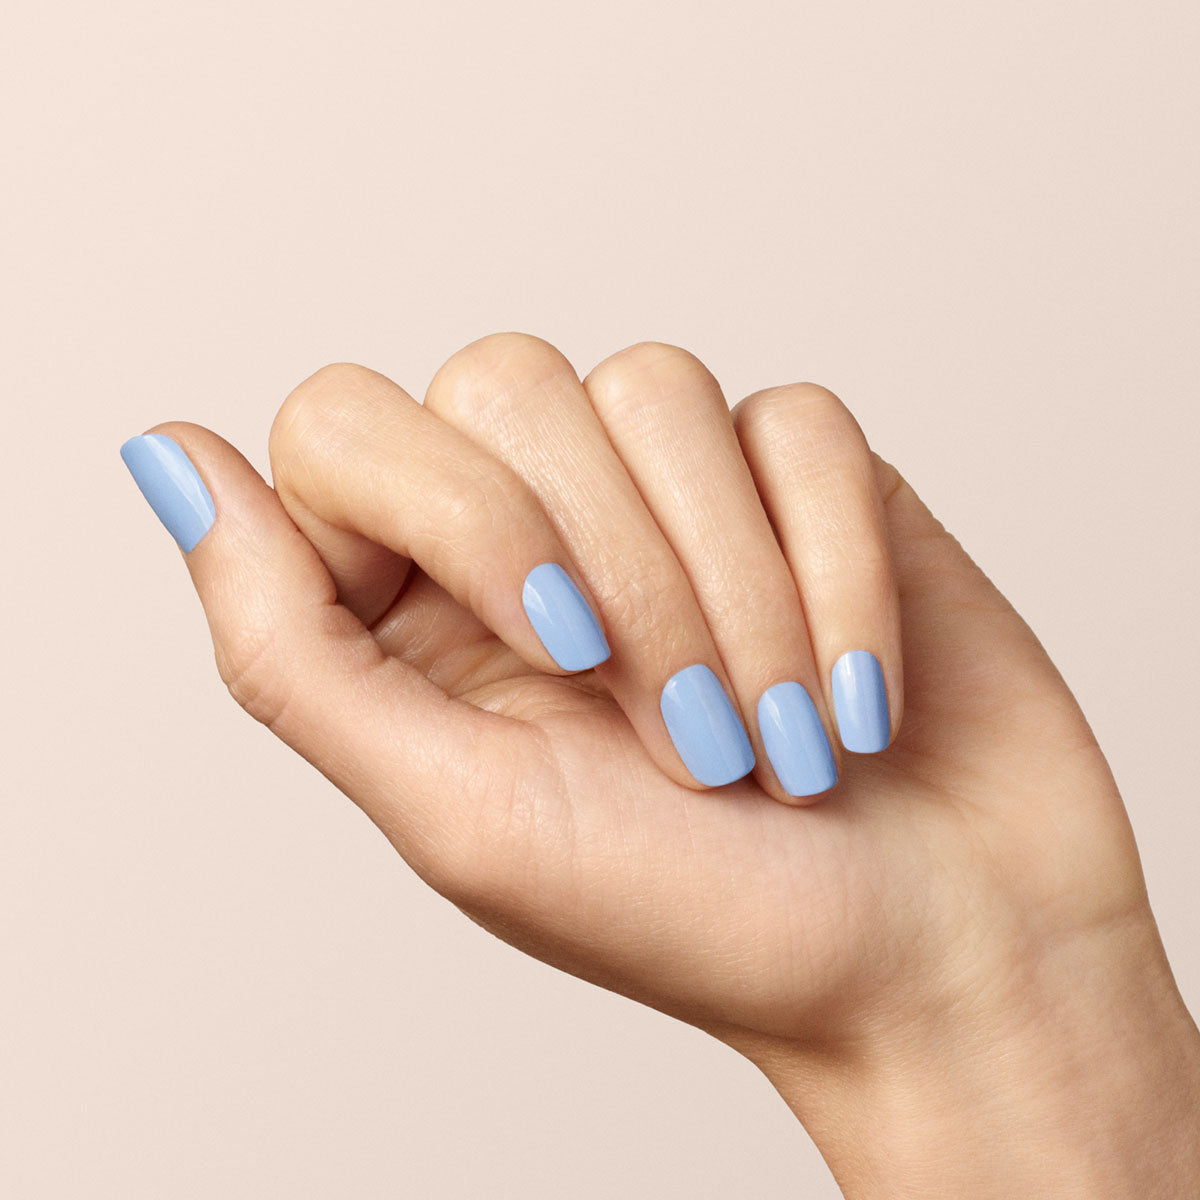 Buy Ice Blue Nail Polish Frosty Pale Pastel Blue Nail Lacquer Cruelty Free  Vegan Nail Polish Formula Light Blue Shimmer Frost Nail Polish Online in  India - Etsy